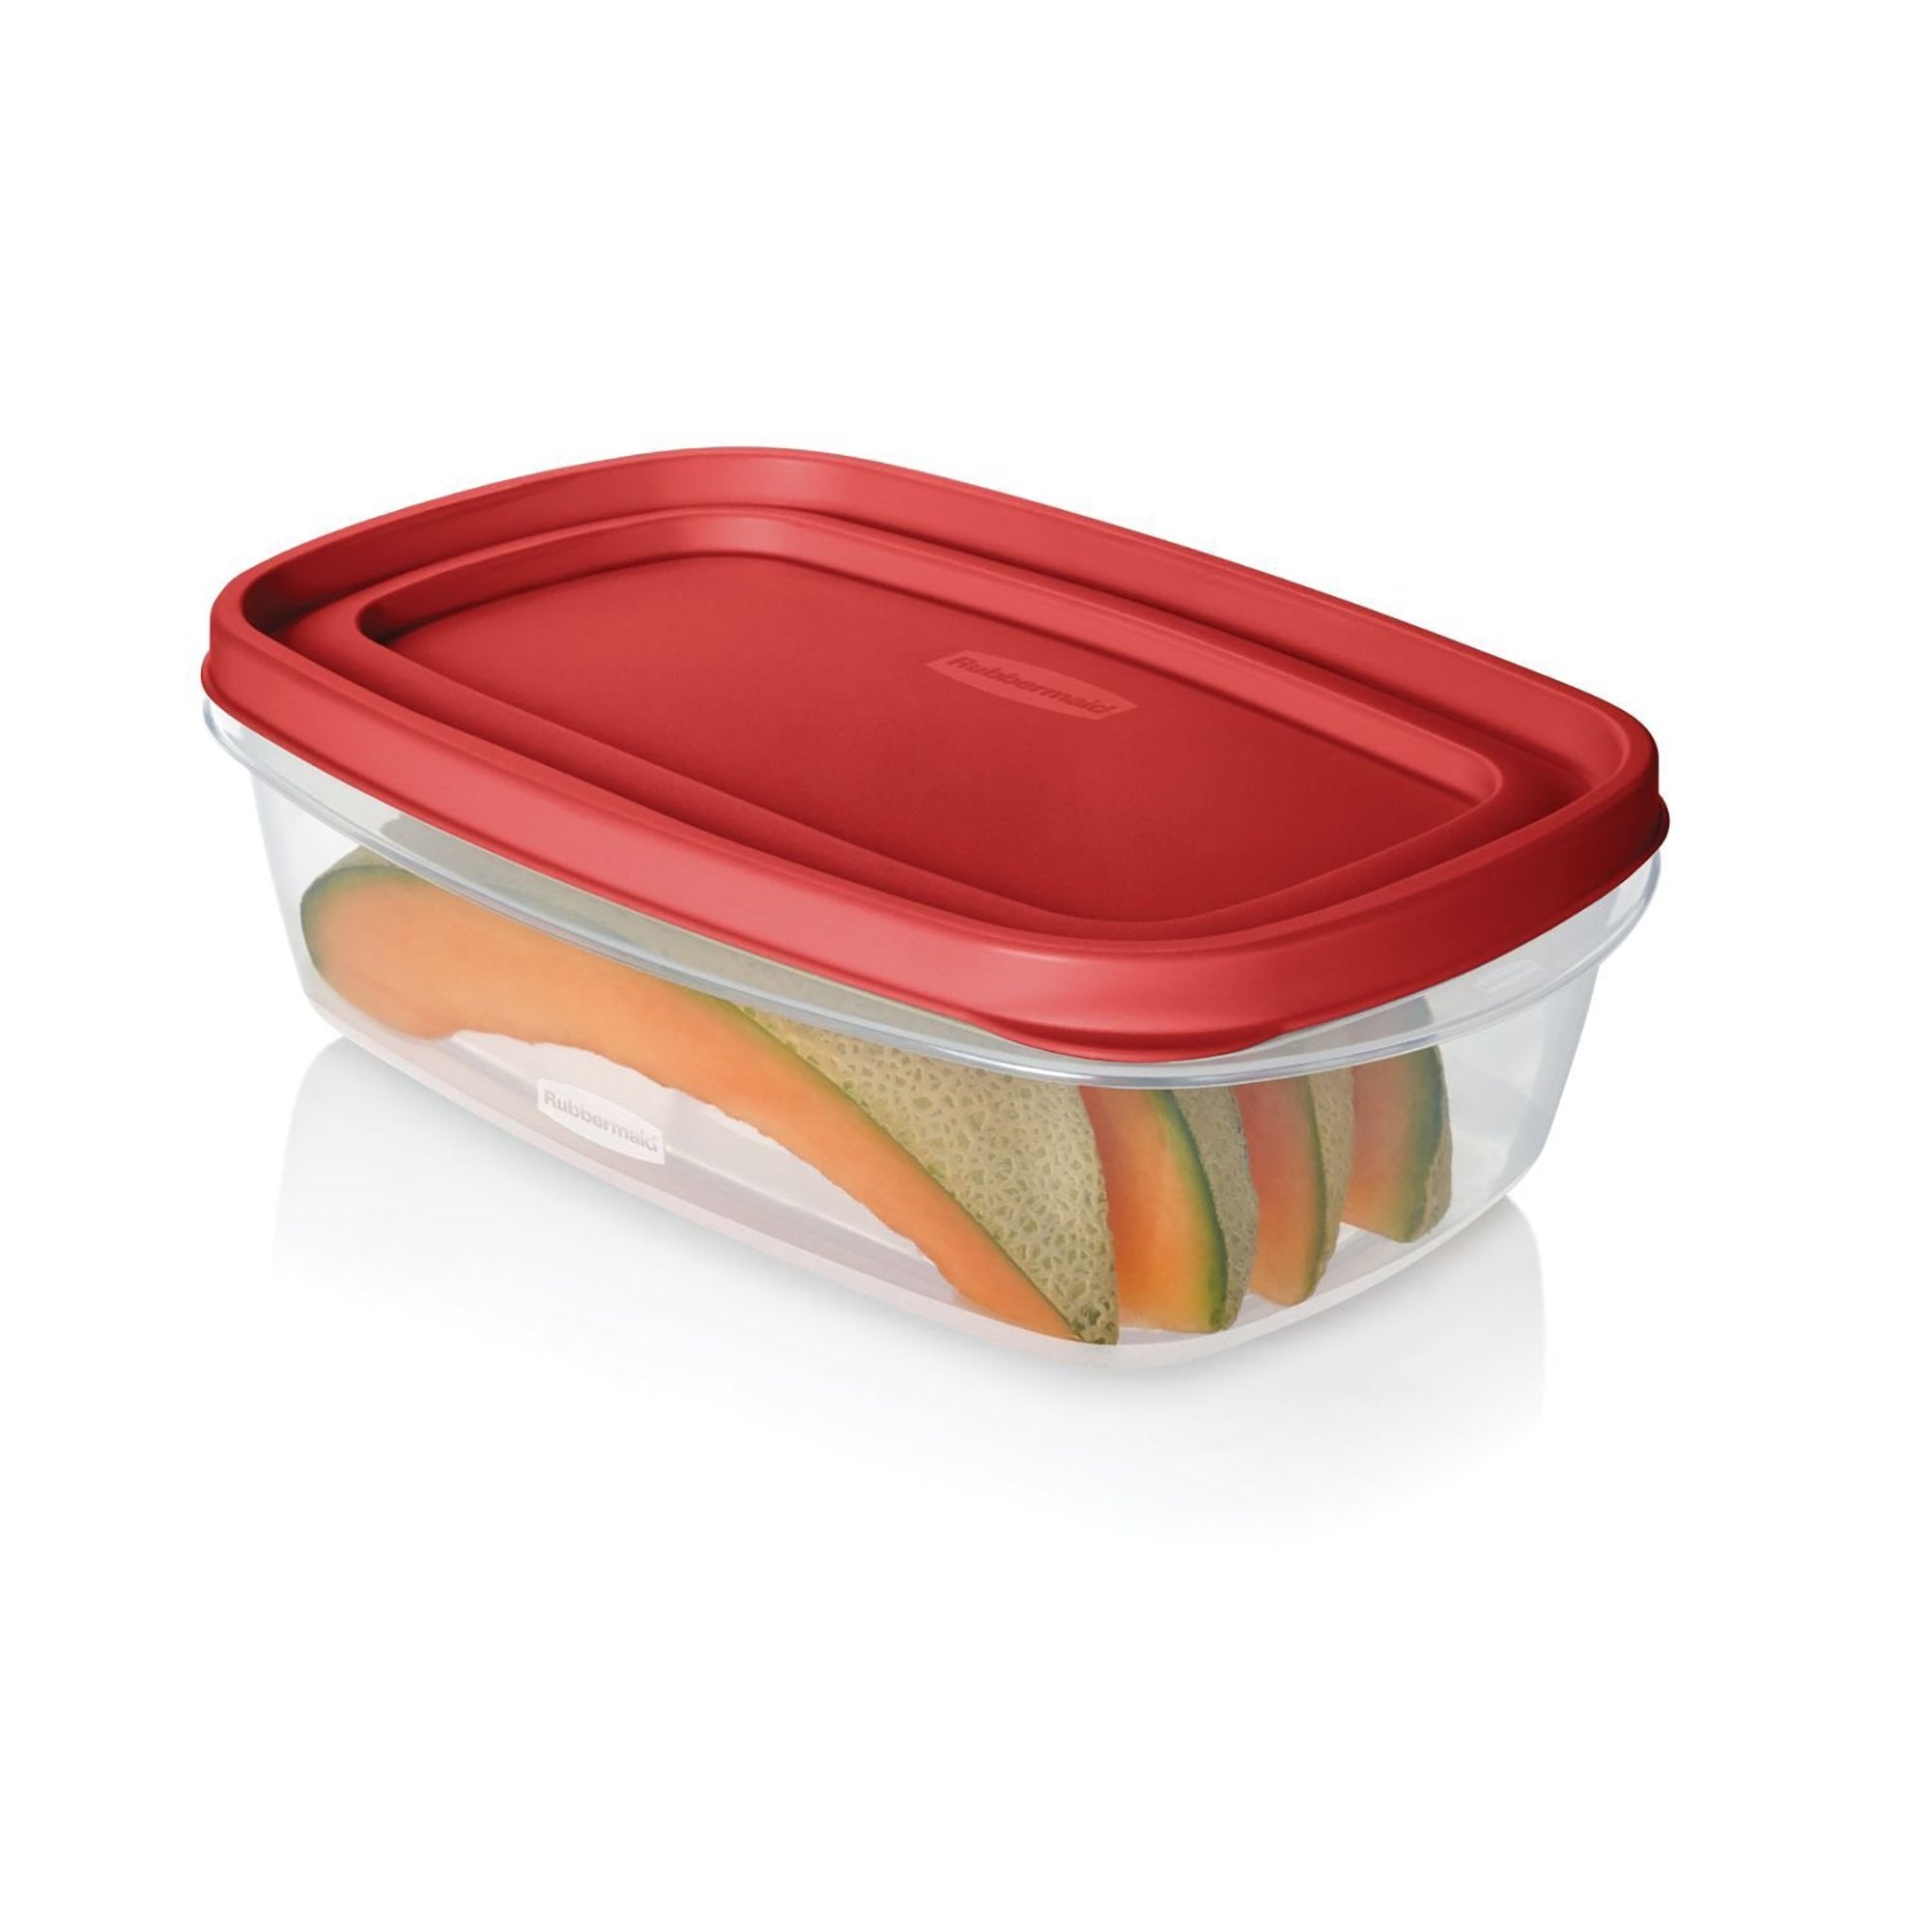 Rubbermaid EasyFindLids Food Storage Container, 2L - Whole and All